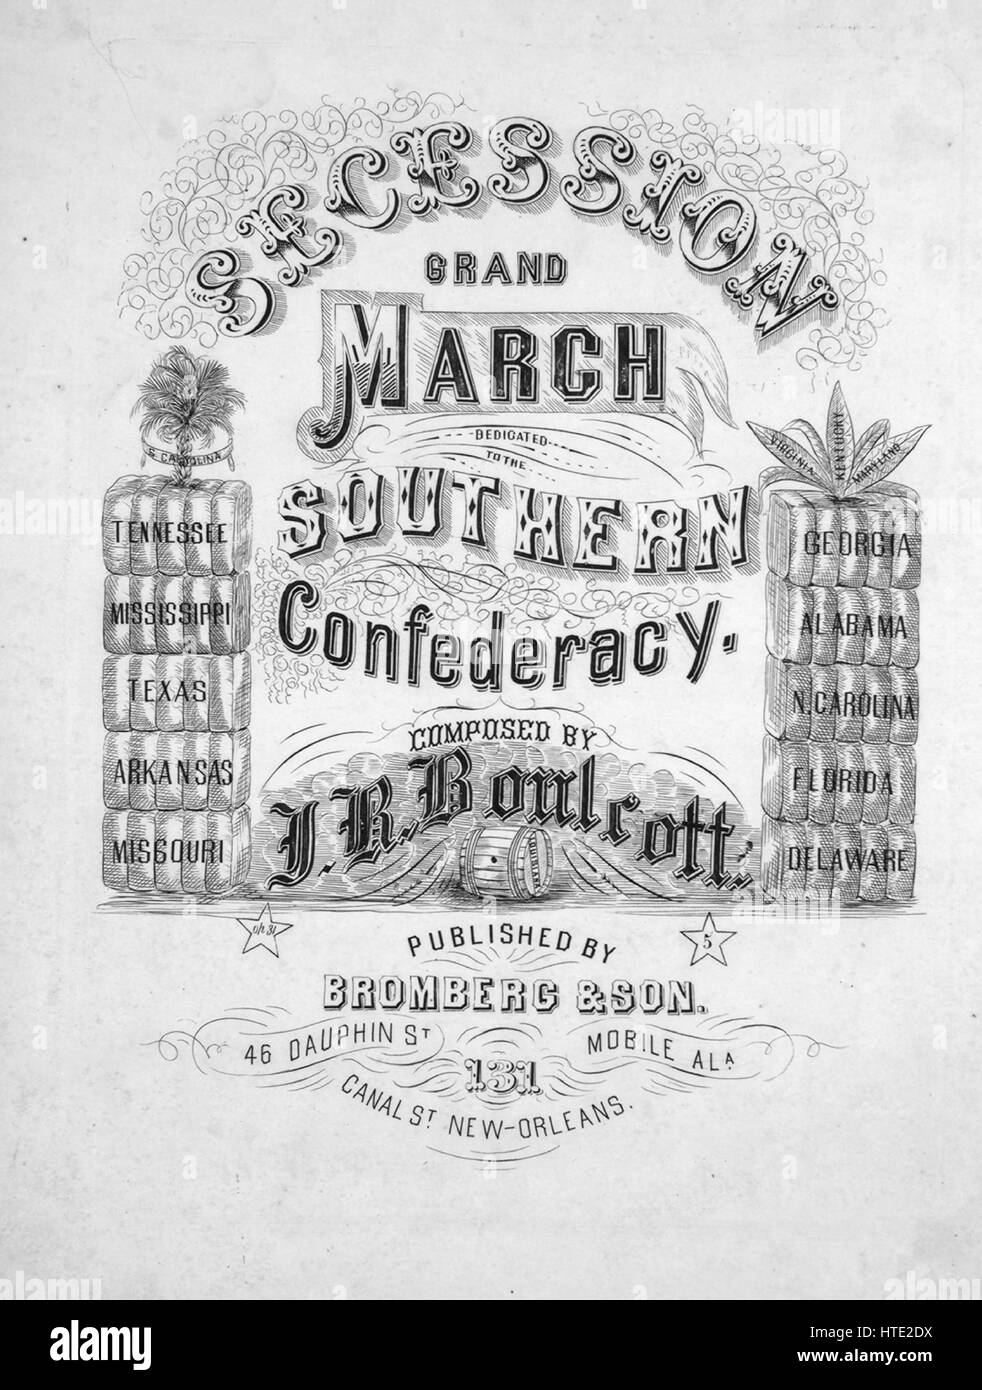 Sheet music cover image of the song 'Secession Grand March', with original authorship notes reading 'Composed by JR Boulrott', 1860. The publisher is listed as 'Bromberg and Son, 46 Dauphin St.', the form of composition is 'da capo', the instrumentation is 'piano', the first line reads 'None', and the illustration artist is listed as 'Wehrmann Eng. Pr.'. Stock Photo